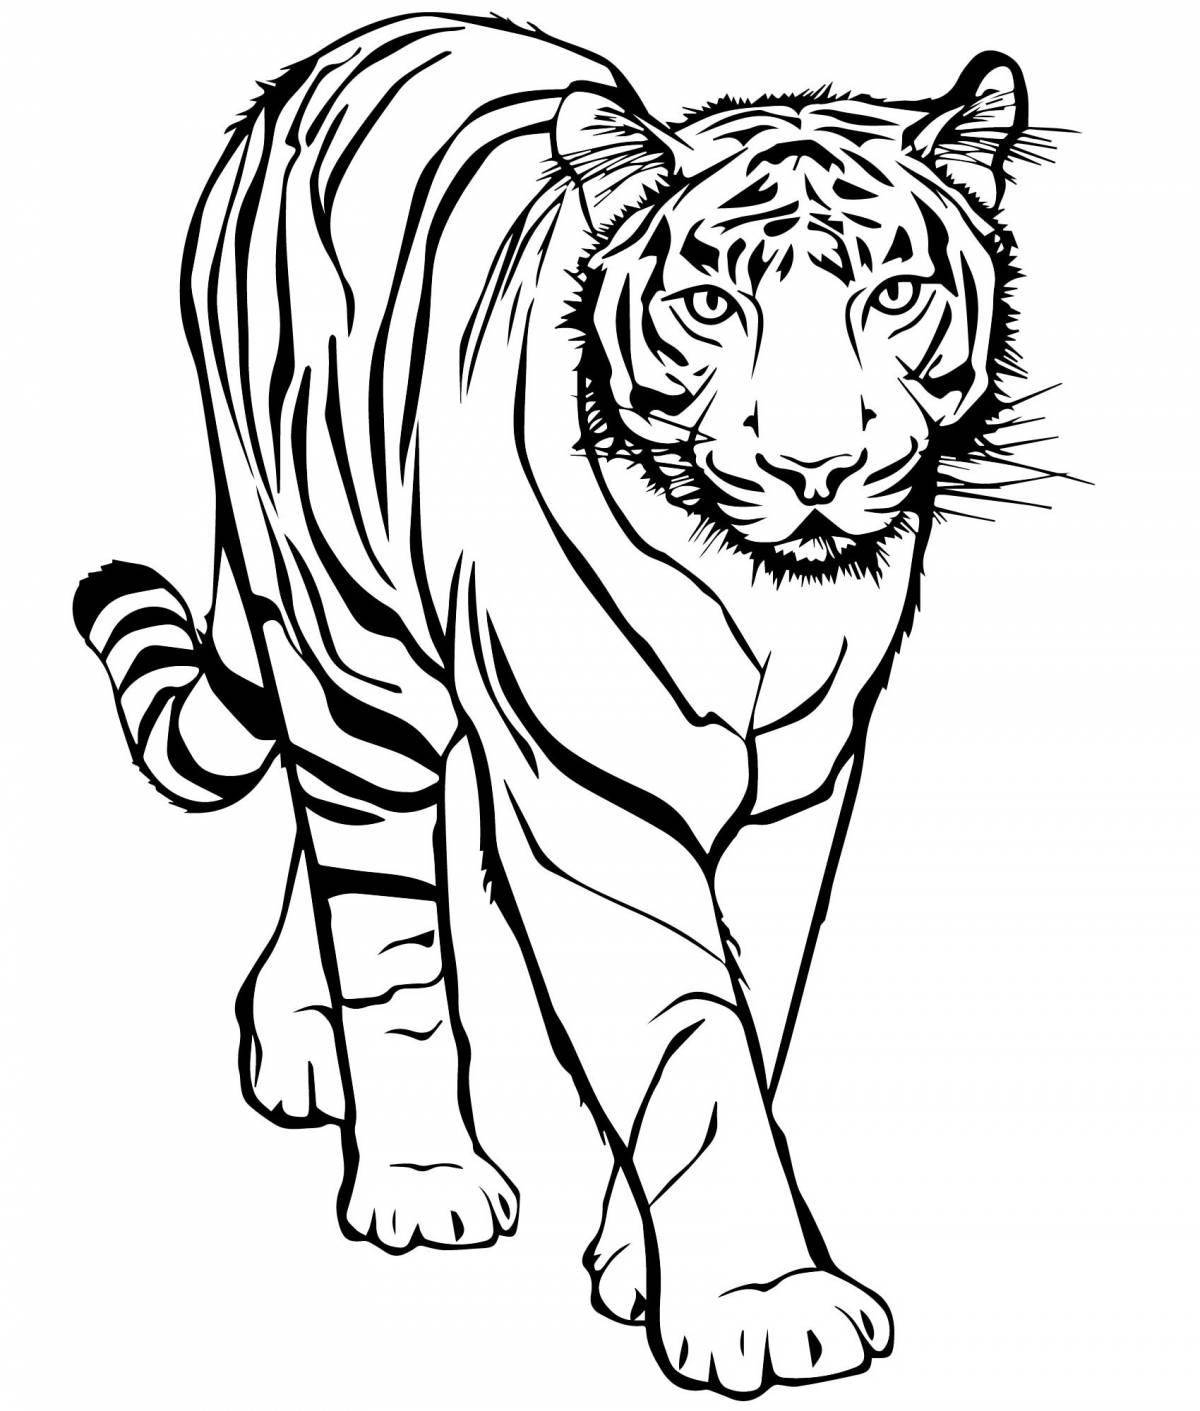 Fabulous bengal tiger coloring page